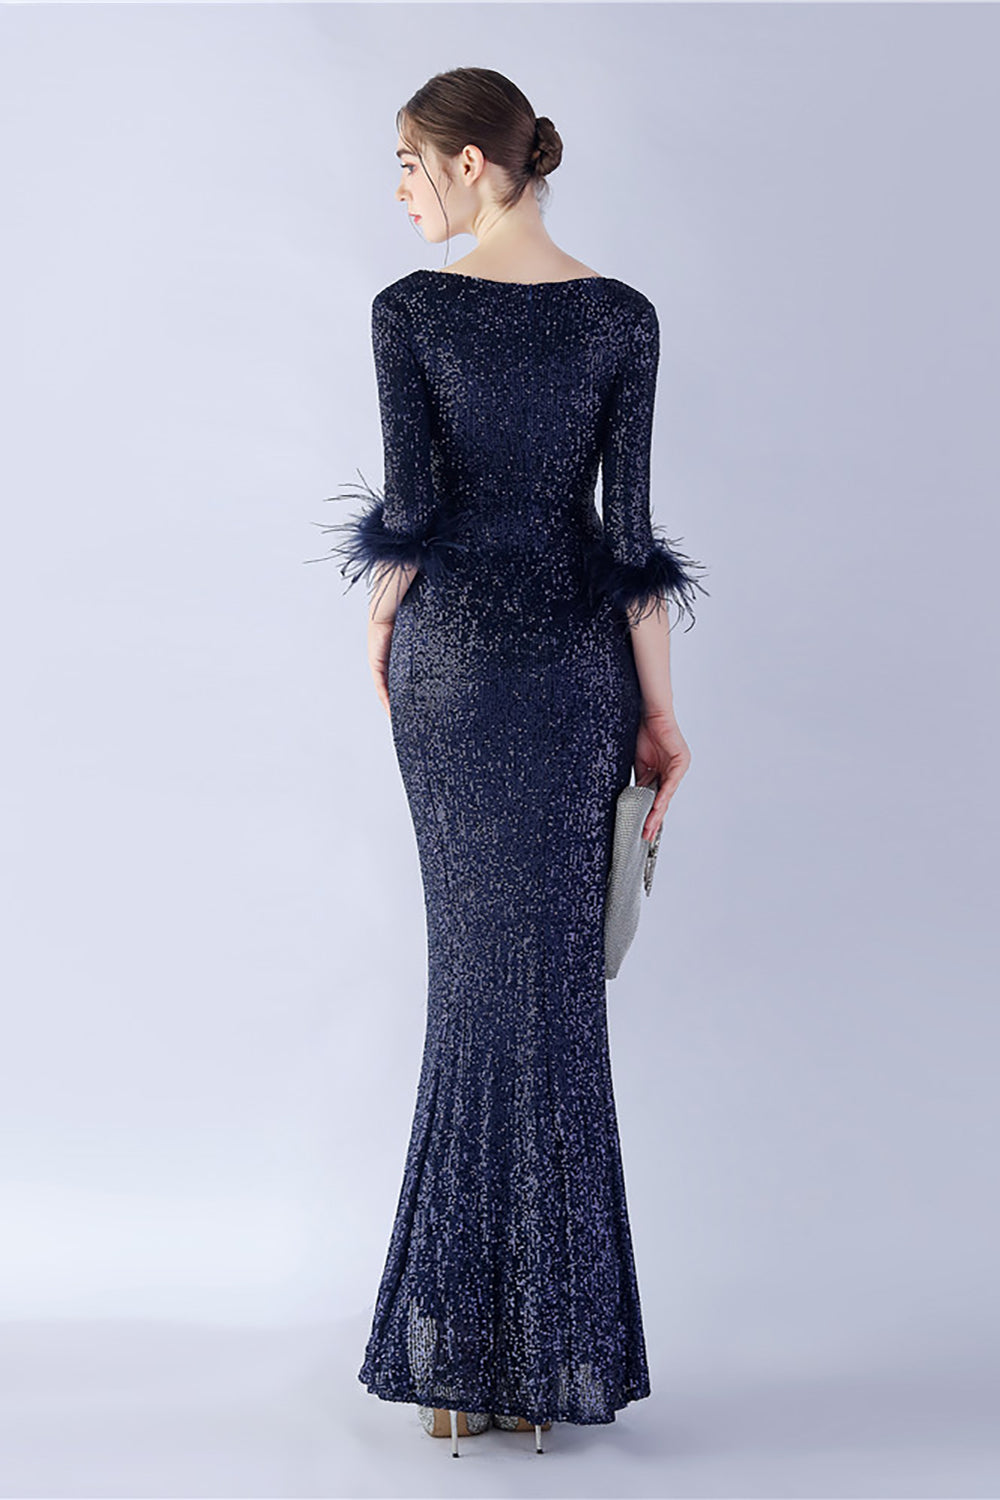 Navy Sheath Sequin V-Neck Half Sleeves Formal Dress with Feather